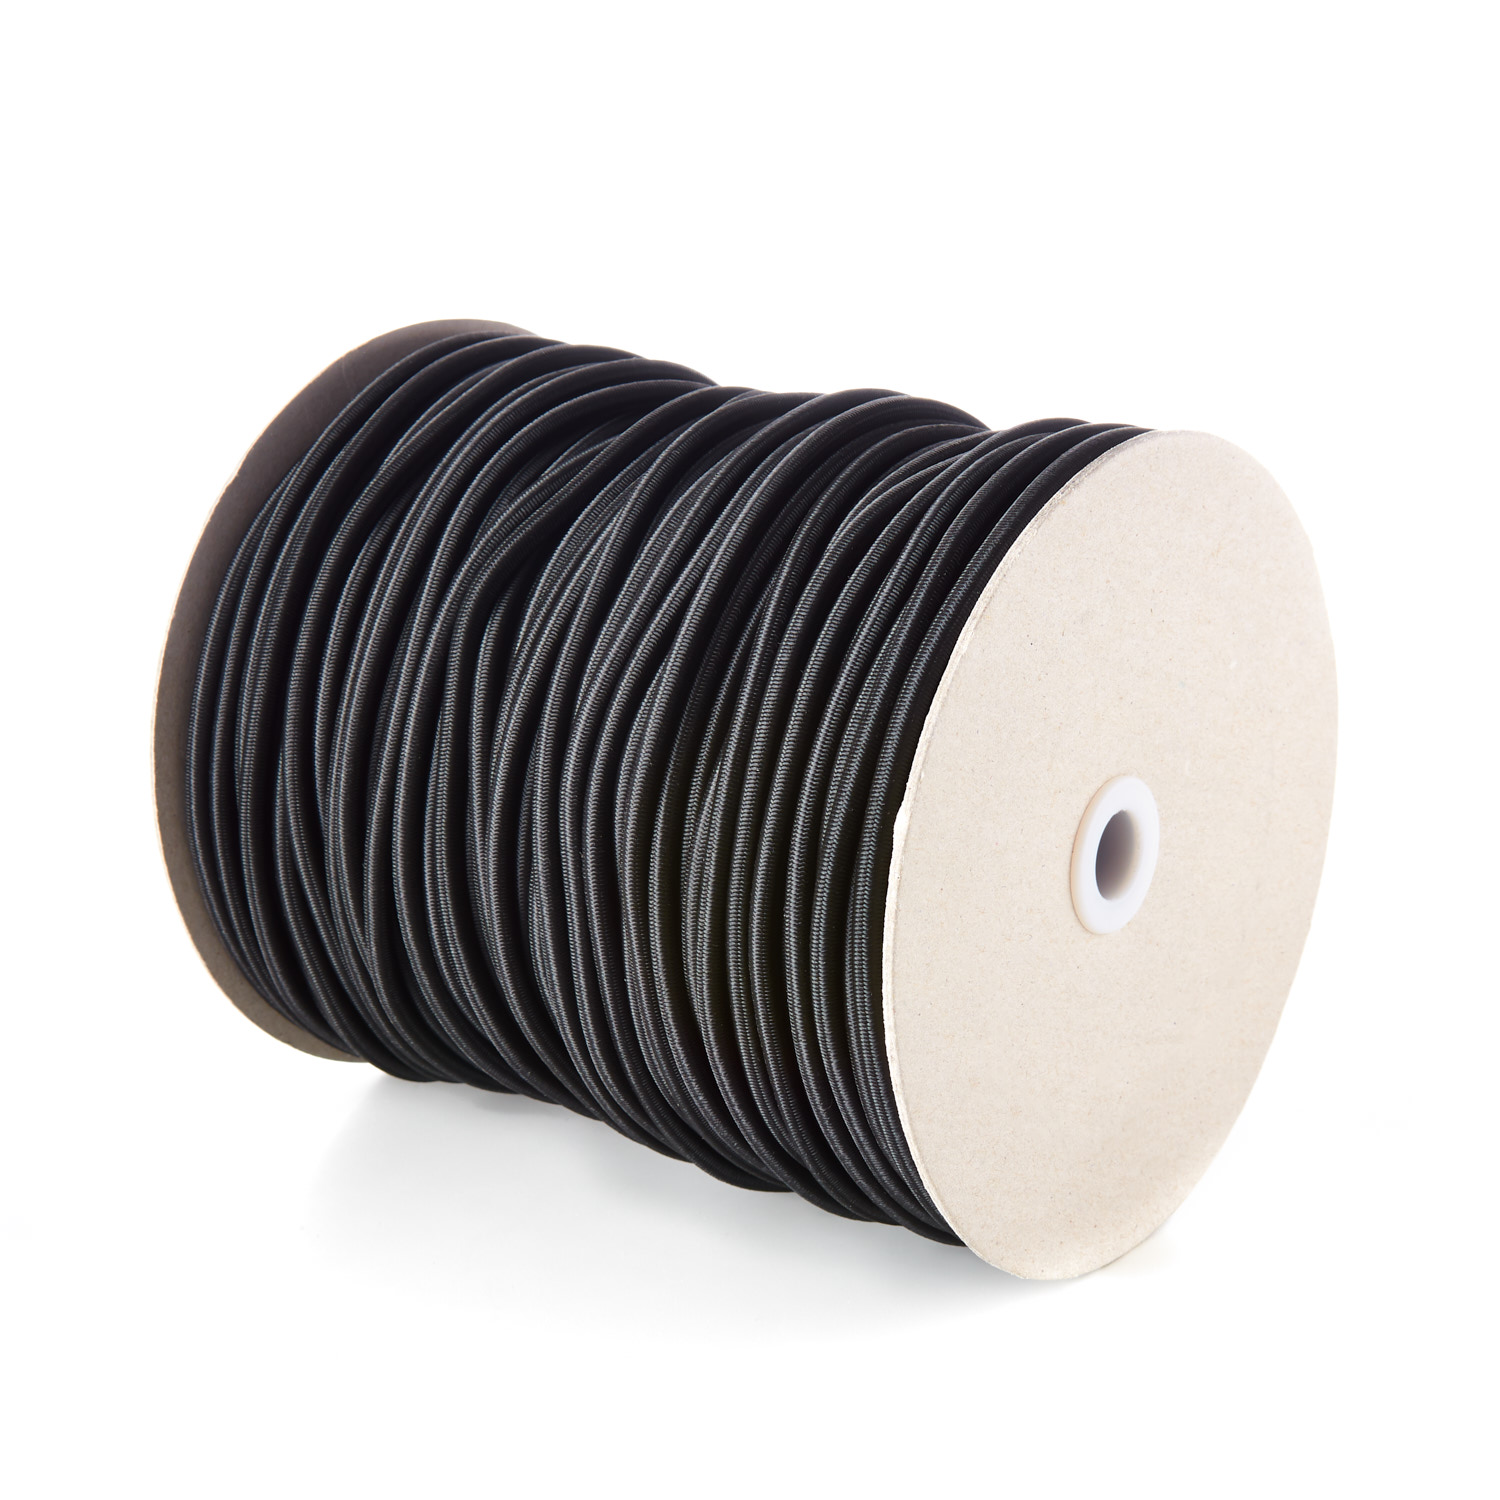 5mm Round Elastic Bungee Shock Cord PE114 Leicester Manufacturer Black Polypropylene Rubber